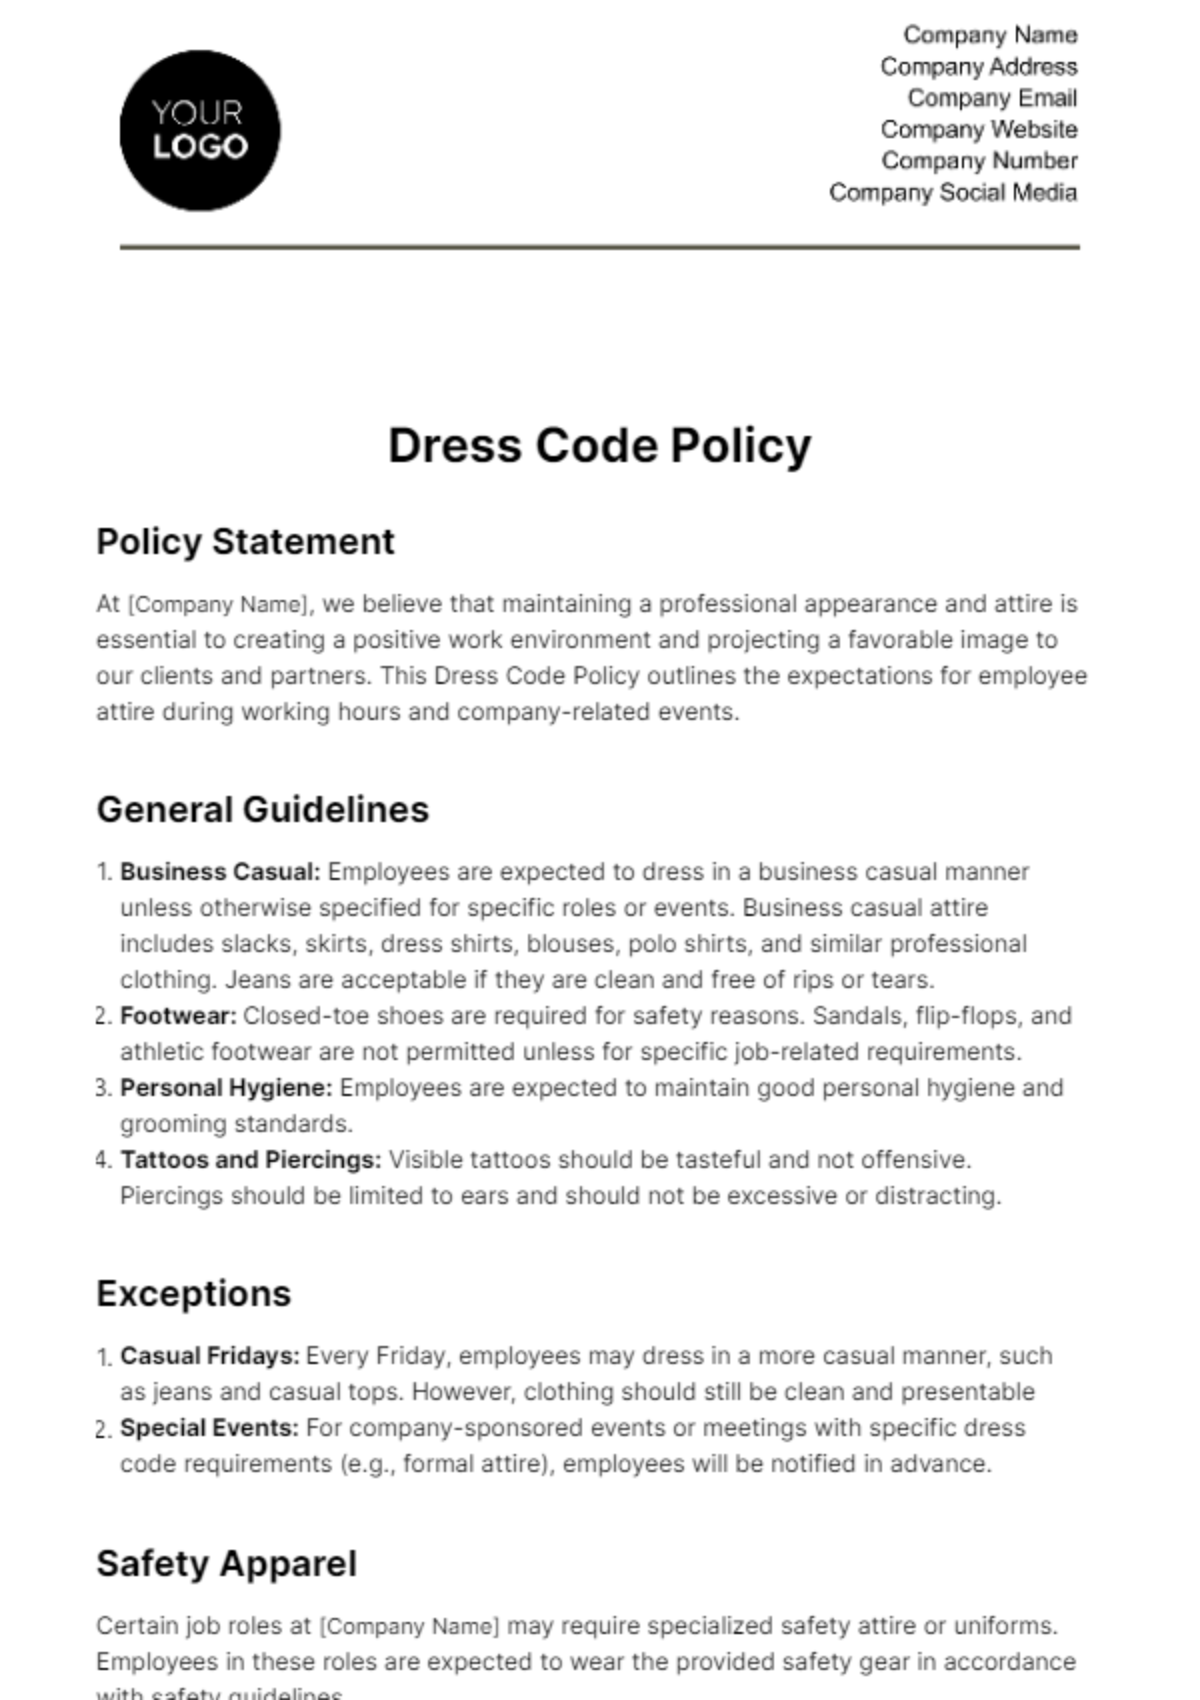 Dress Code Policy HR Template